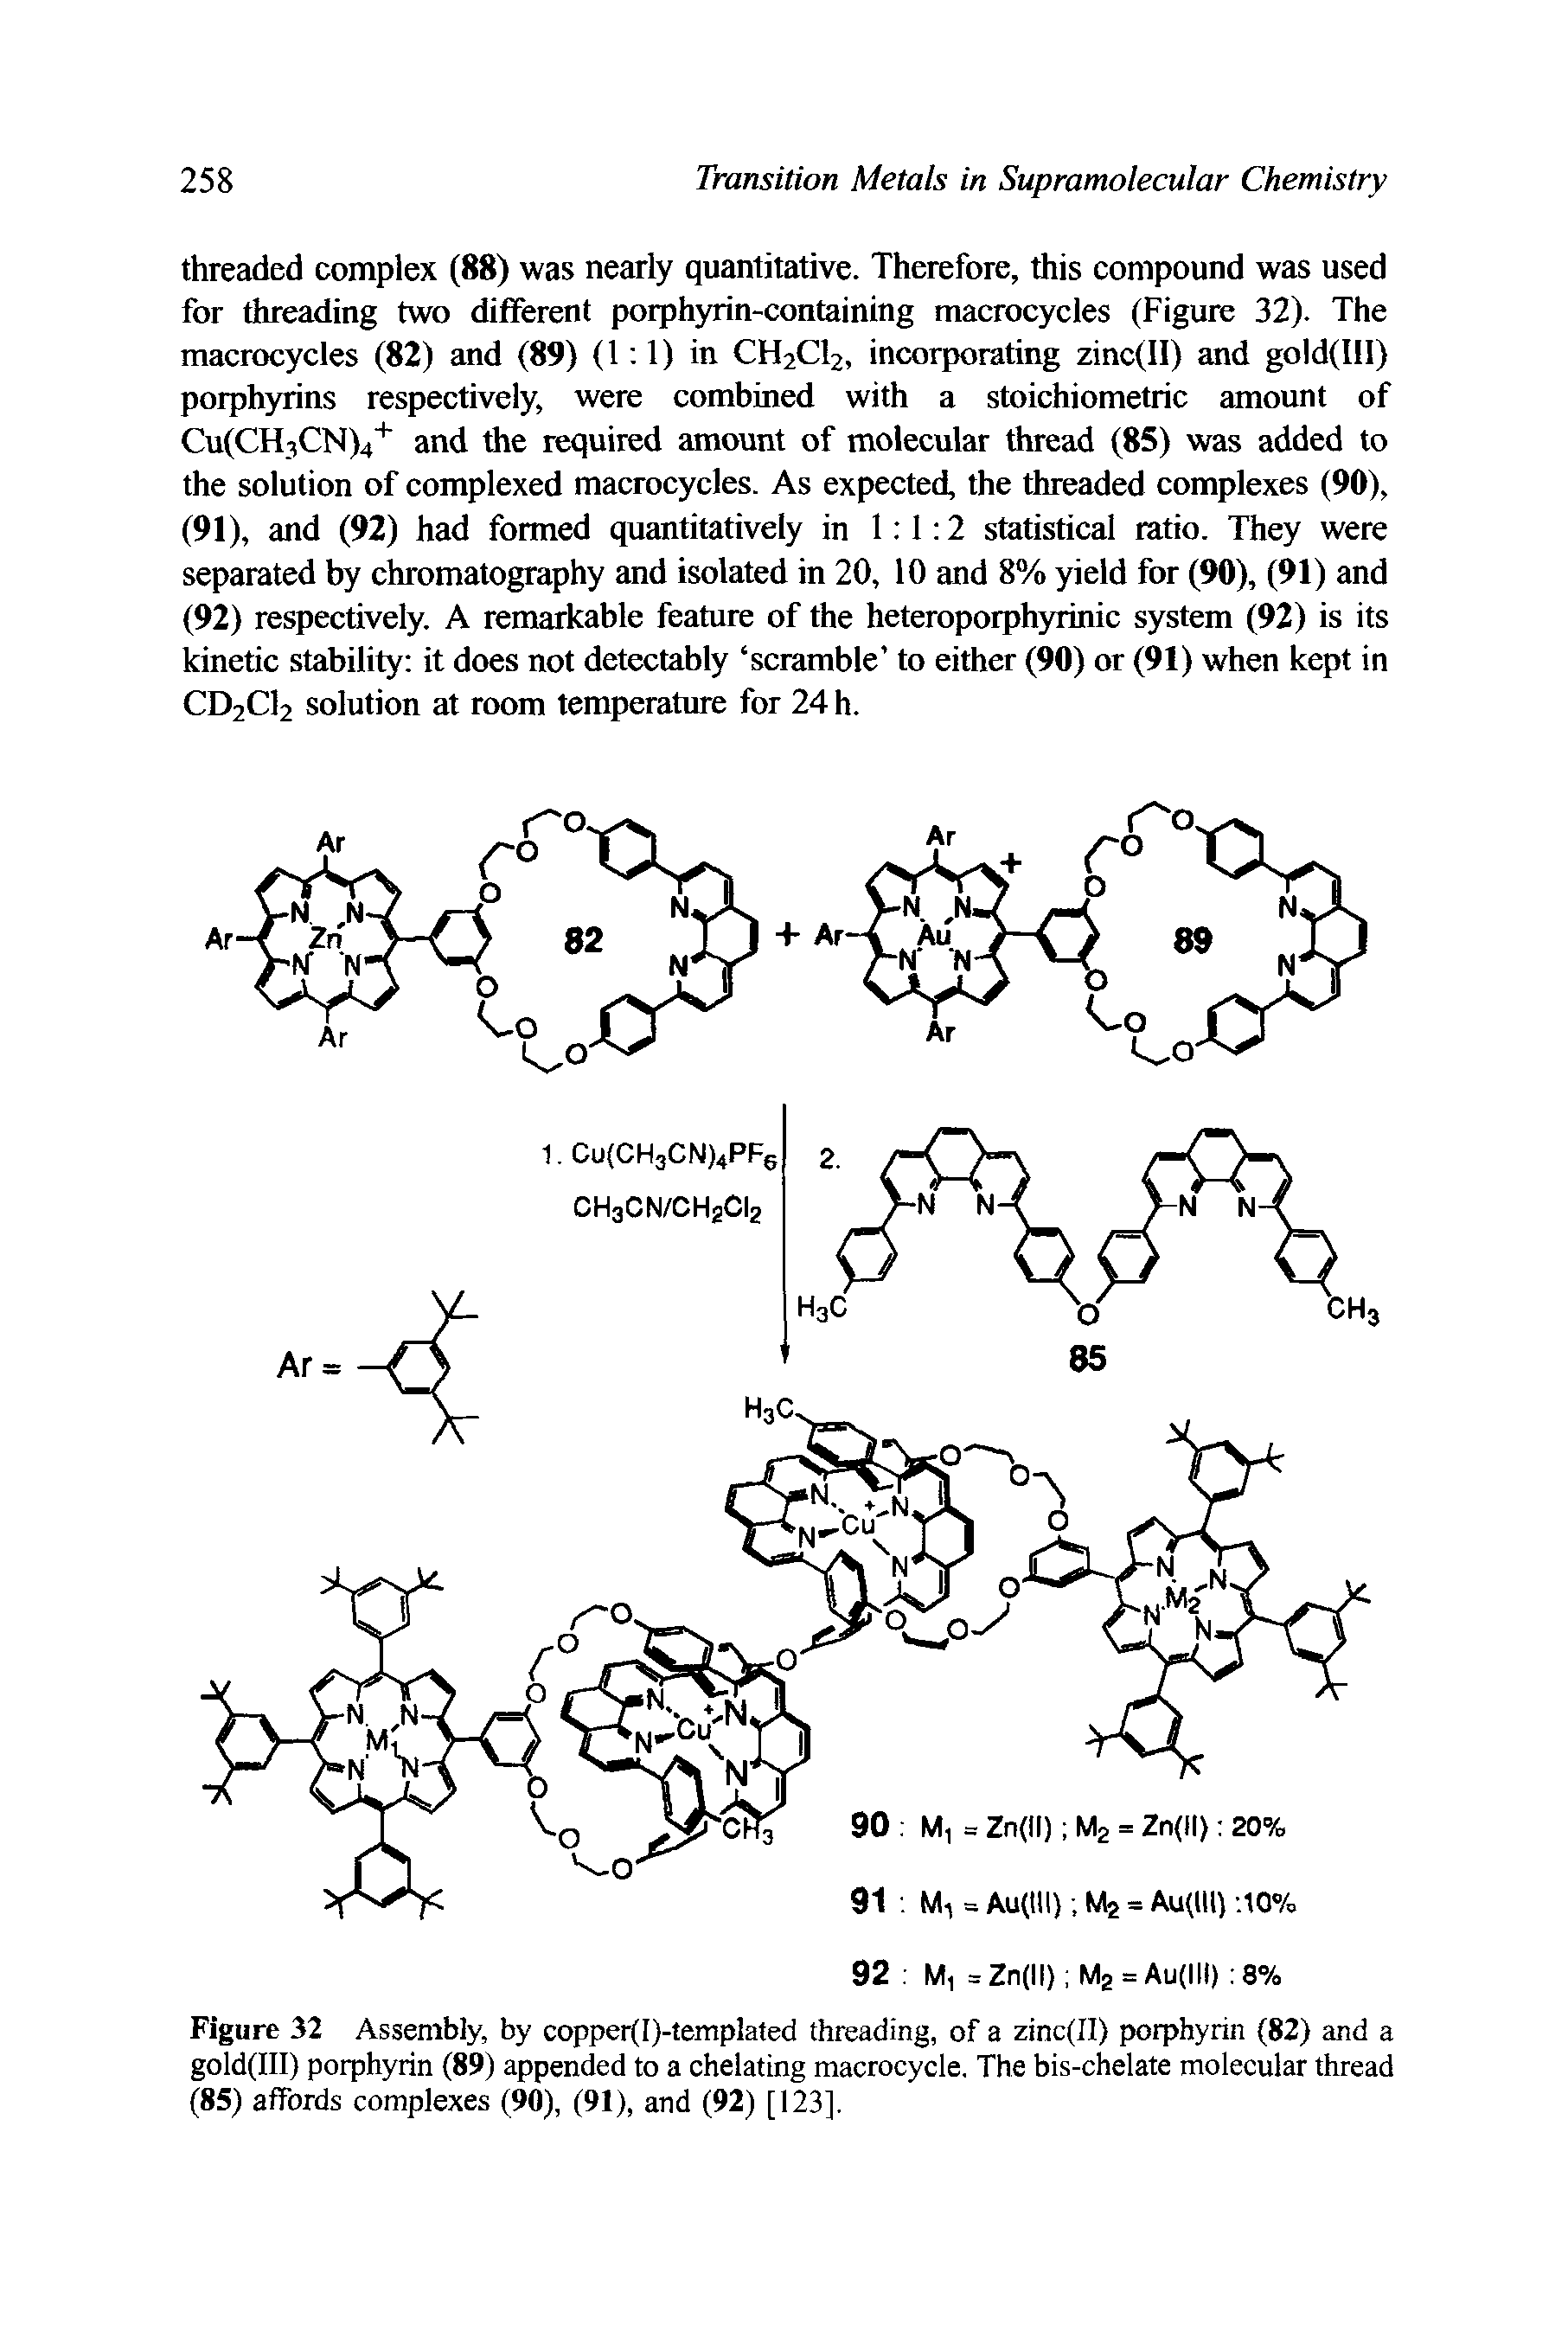 Figure 32 Assembly, by copper(I)-templated threading, of a zinc(II) poq>hyrin (82) and a gold(III) porphyrin (89) appended to a chelating macrocycle. The bis-chelate molecular thread (85) affords complexes (90), (91), and (92) [123].